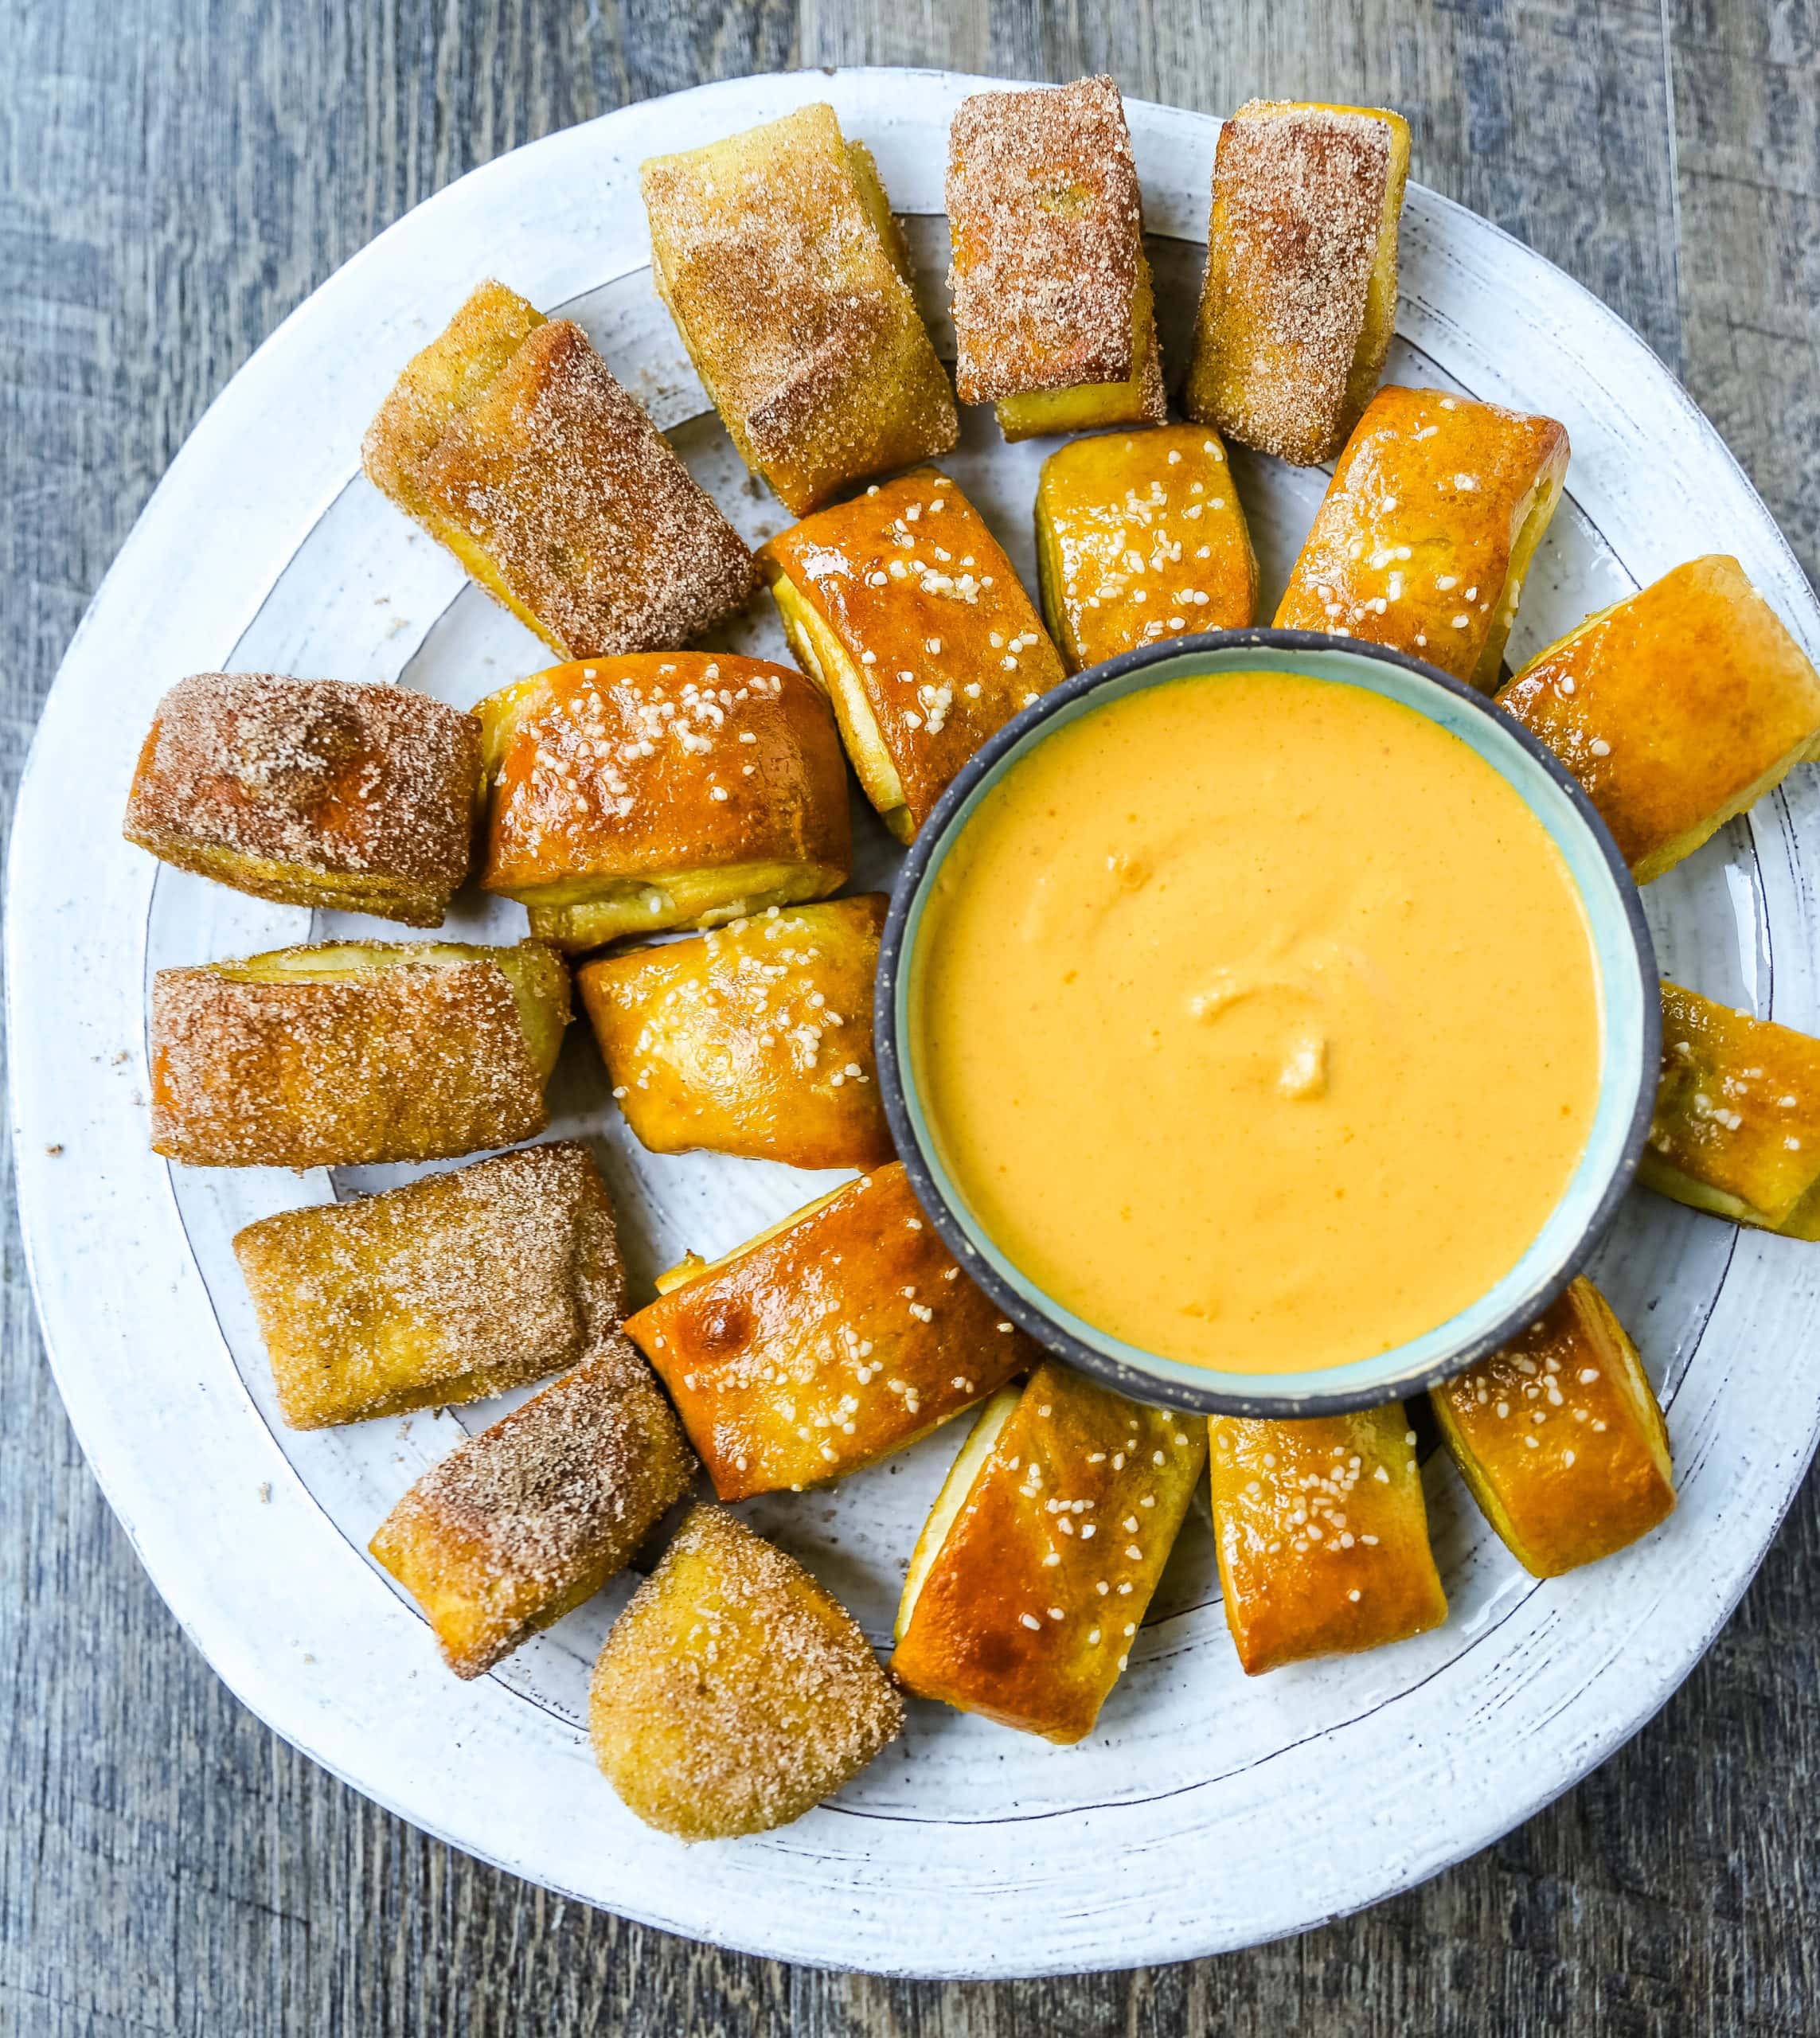 Homemade Soft Pretzel Bites Soft buttery homemade pretzel bites just like you find in the pretzel stores in the mall but even better! It is so easy to make pretzel bites at home. www.modernhoney.com #pretzels #pretzel #homemadepretzels #pretzelbites